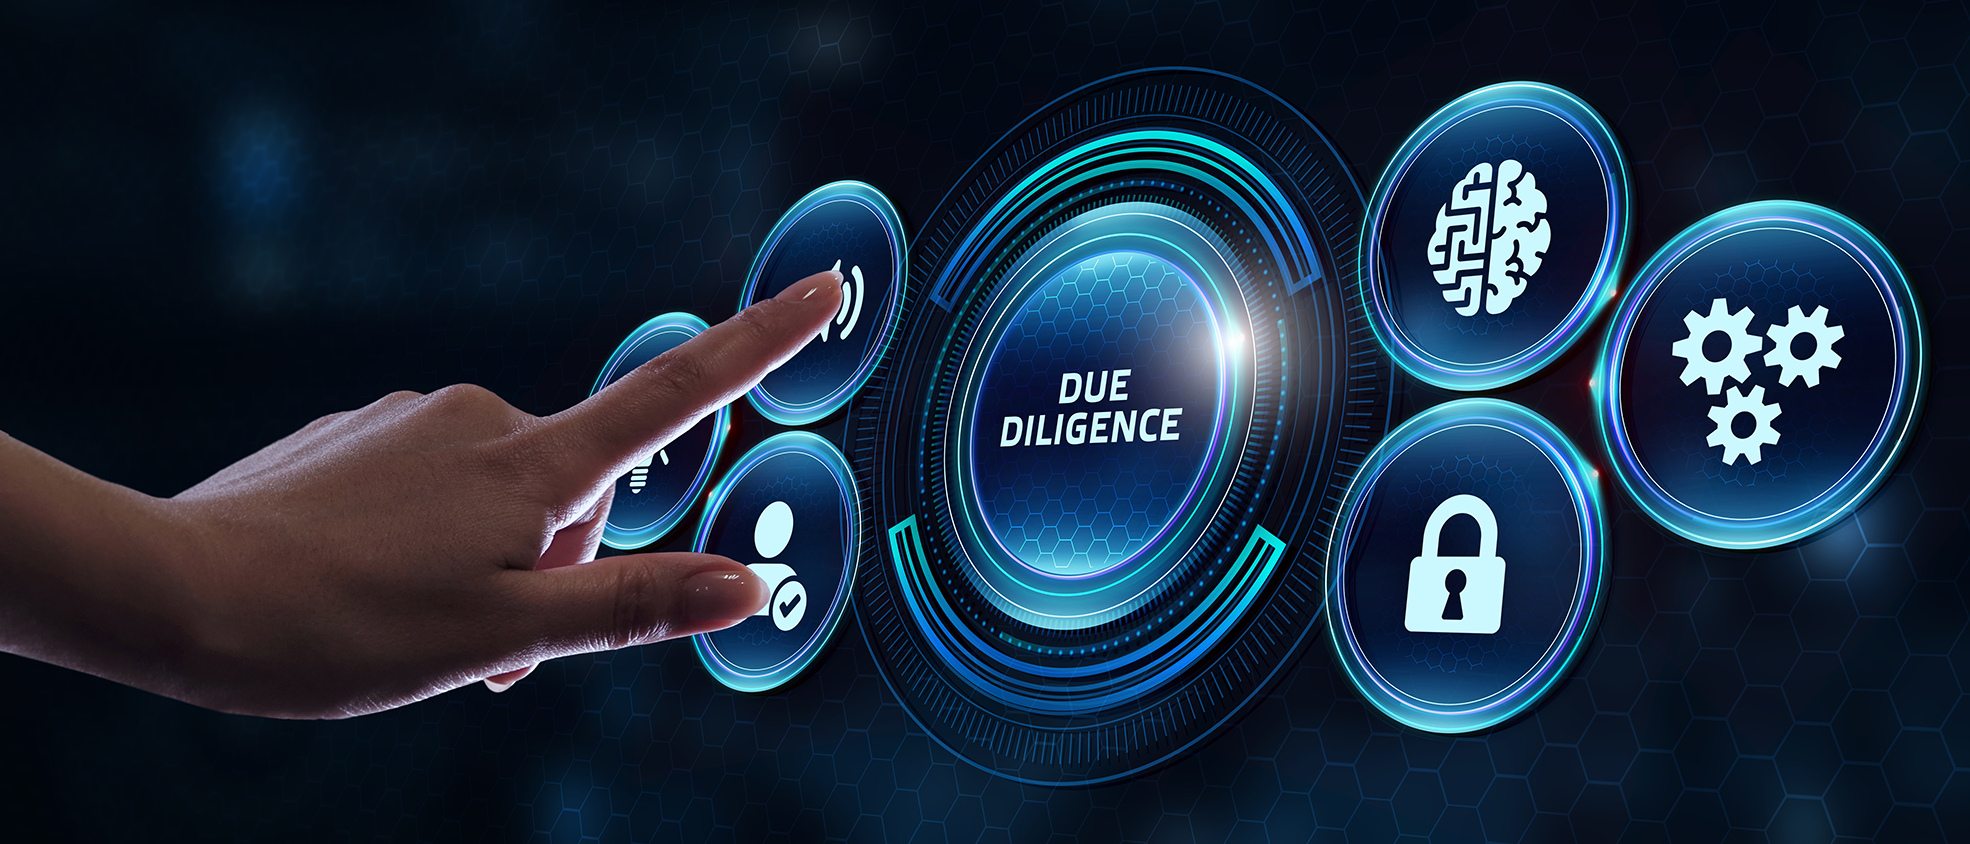 Know about technology-first due diligence business process